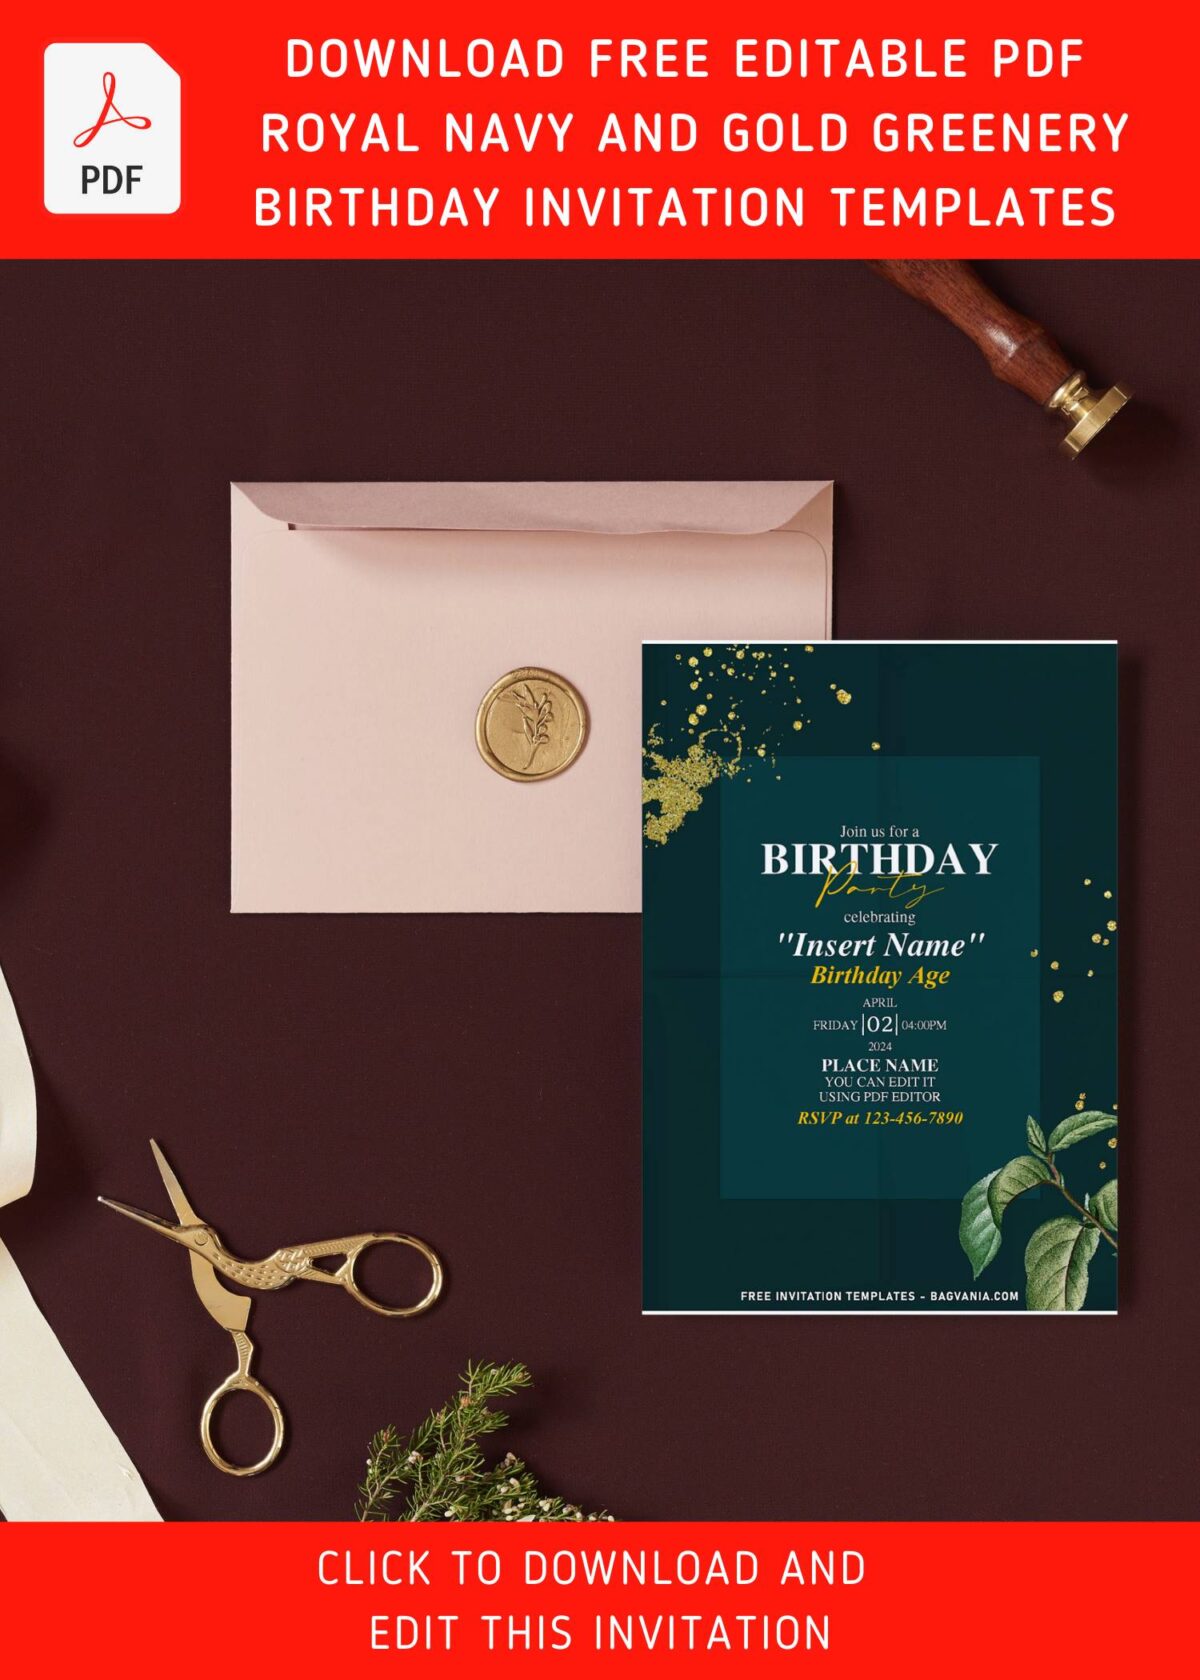 (Free Editable PDF) Royal Navy And Gold Greenery Invitation Templates with portrait orientation design